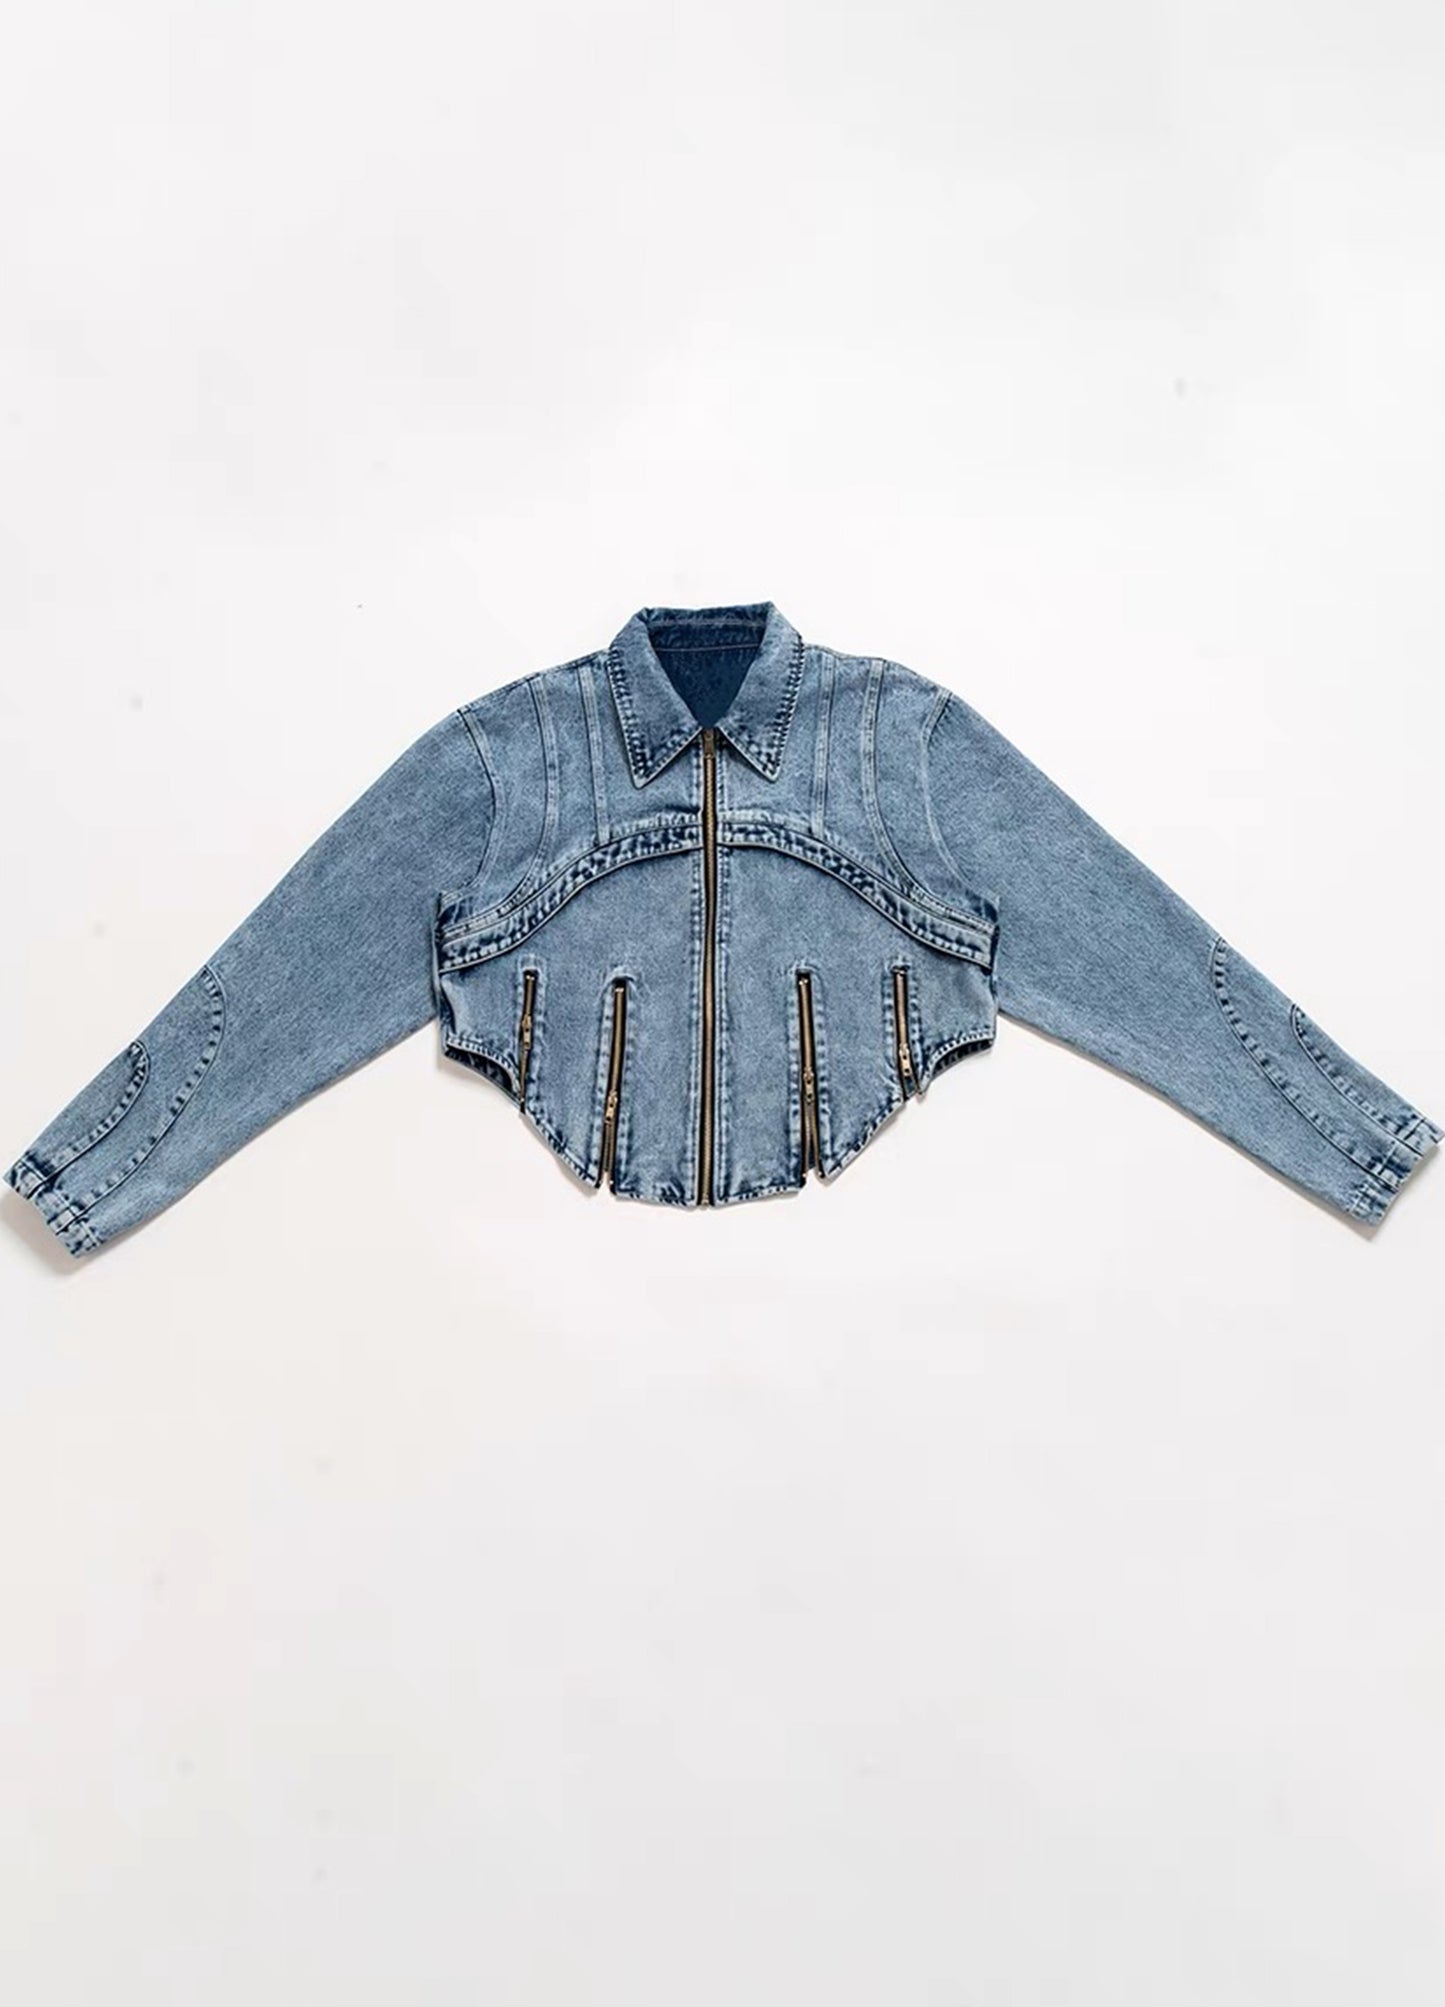 Cropped Washed Jeans Jacket